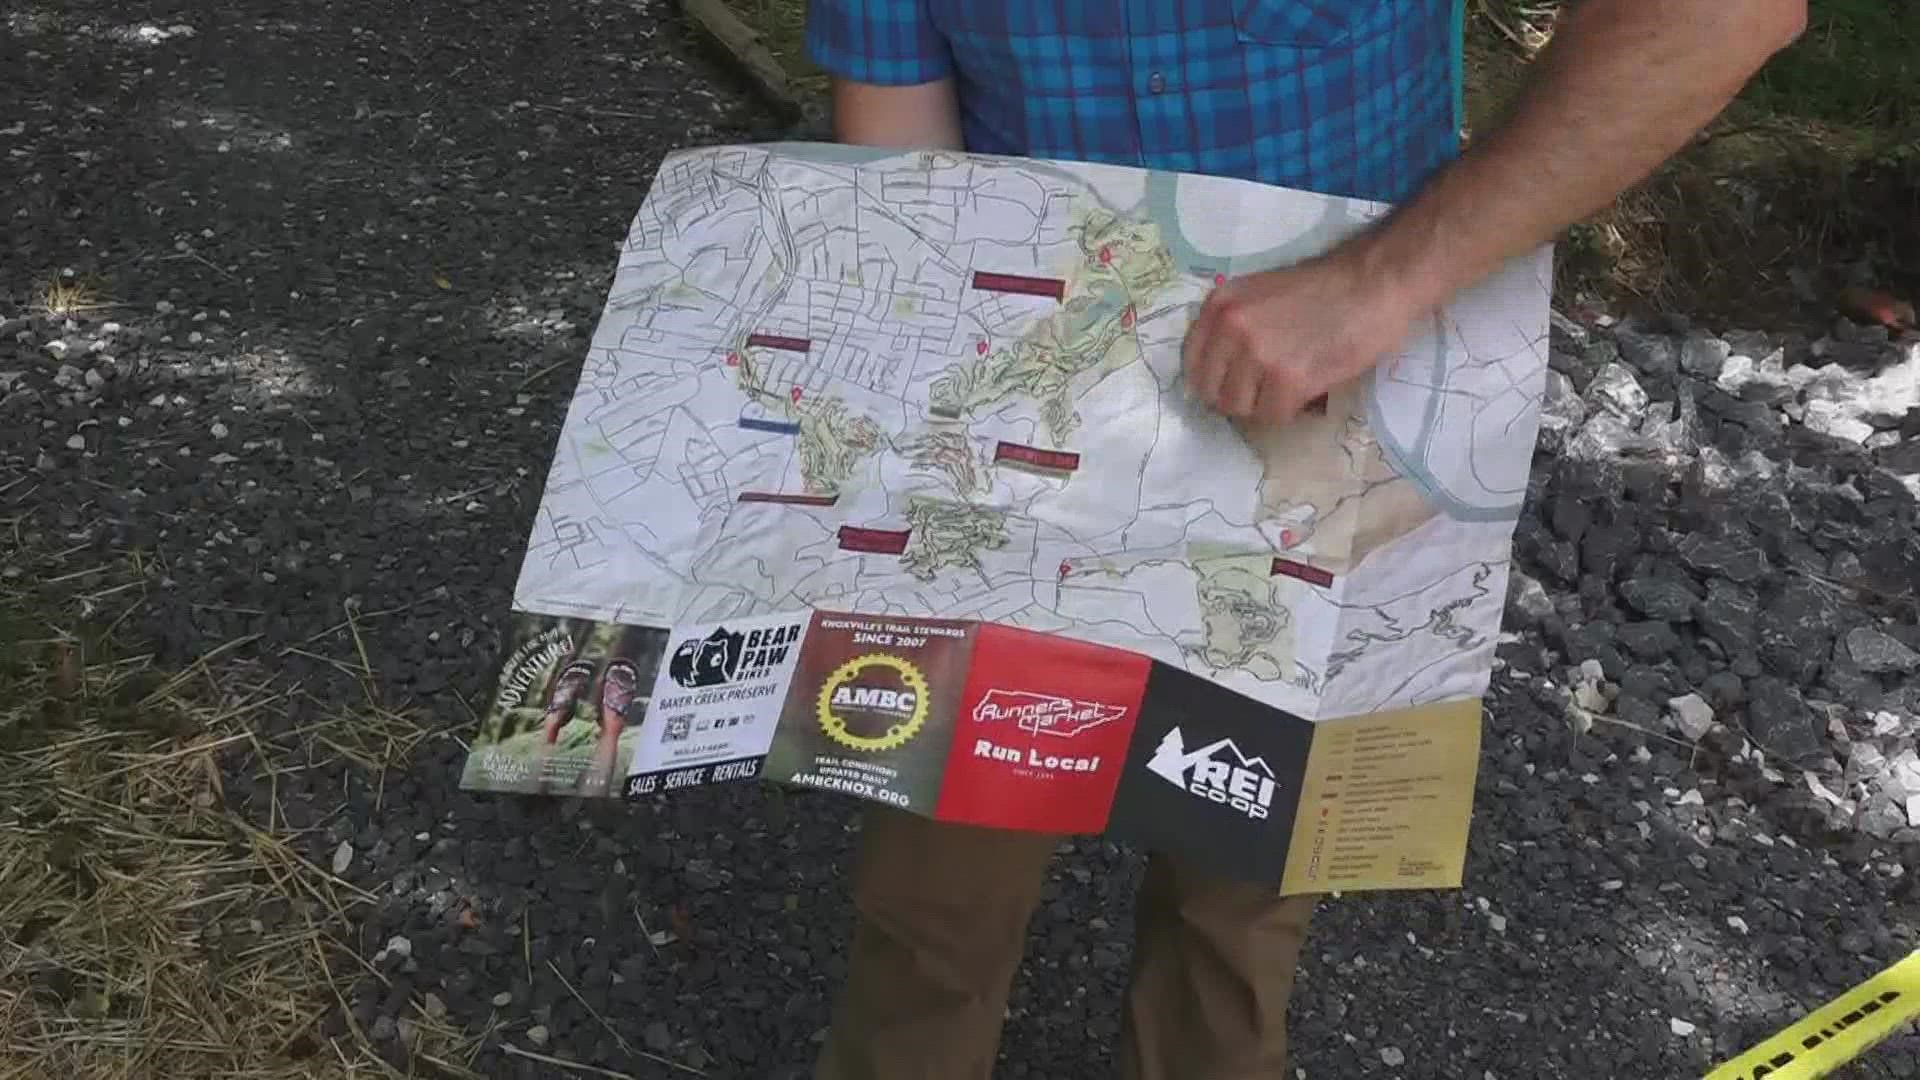 Four new trails opened in South Knoxville and created two more miles of fun for outdoor enthusiasts.